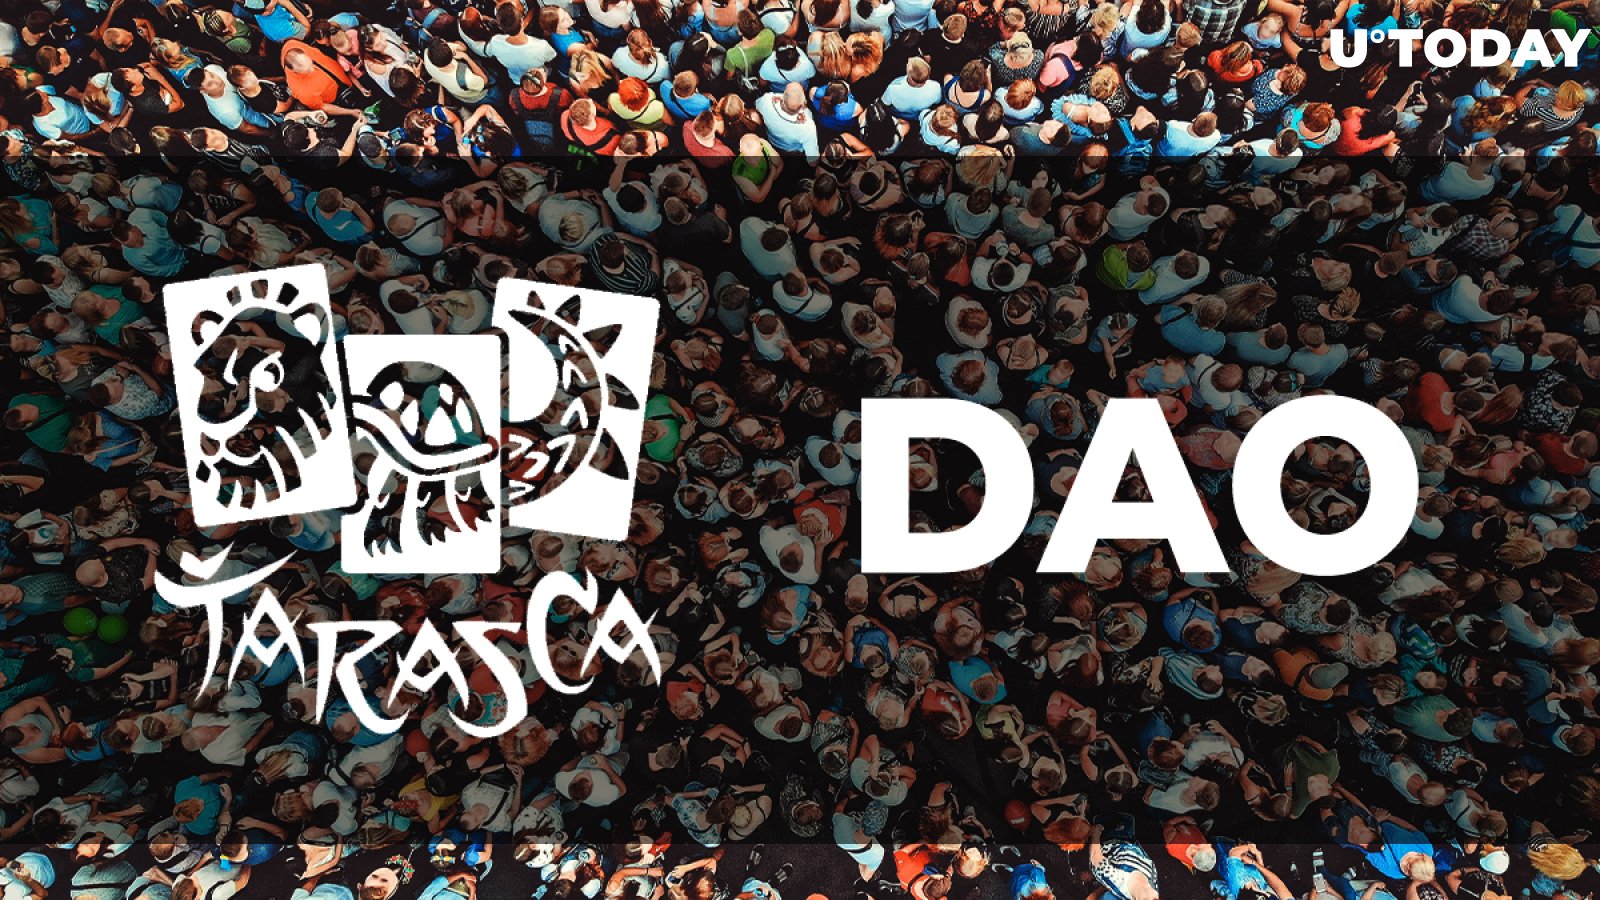 Tarasca DAO - Could This Be the First DAO with Mass Appeal?